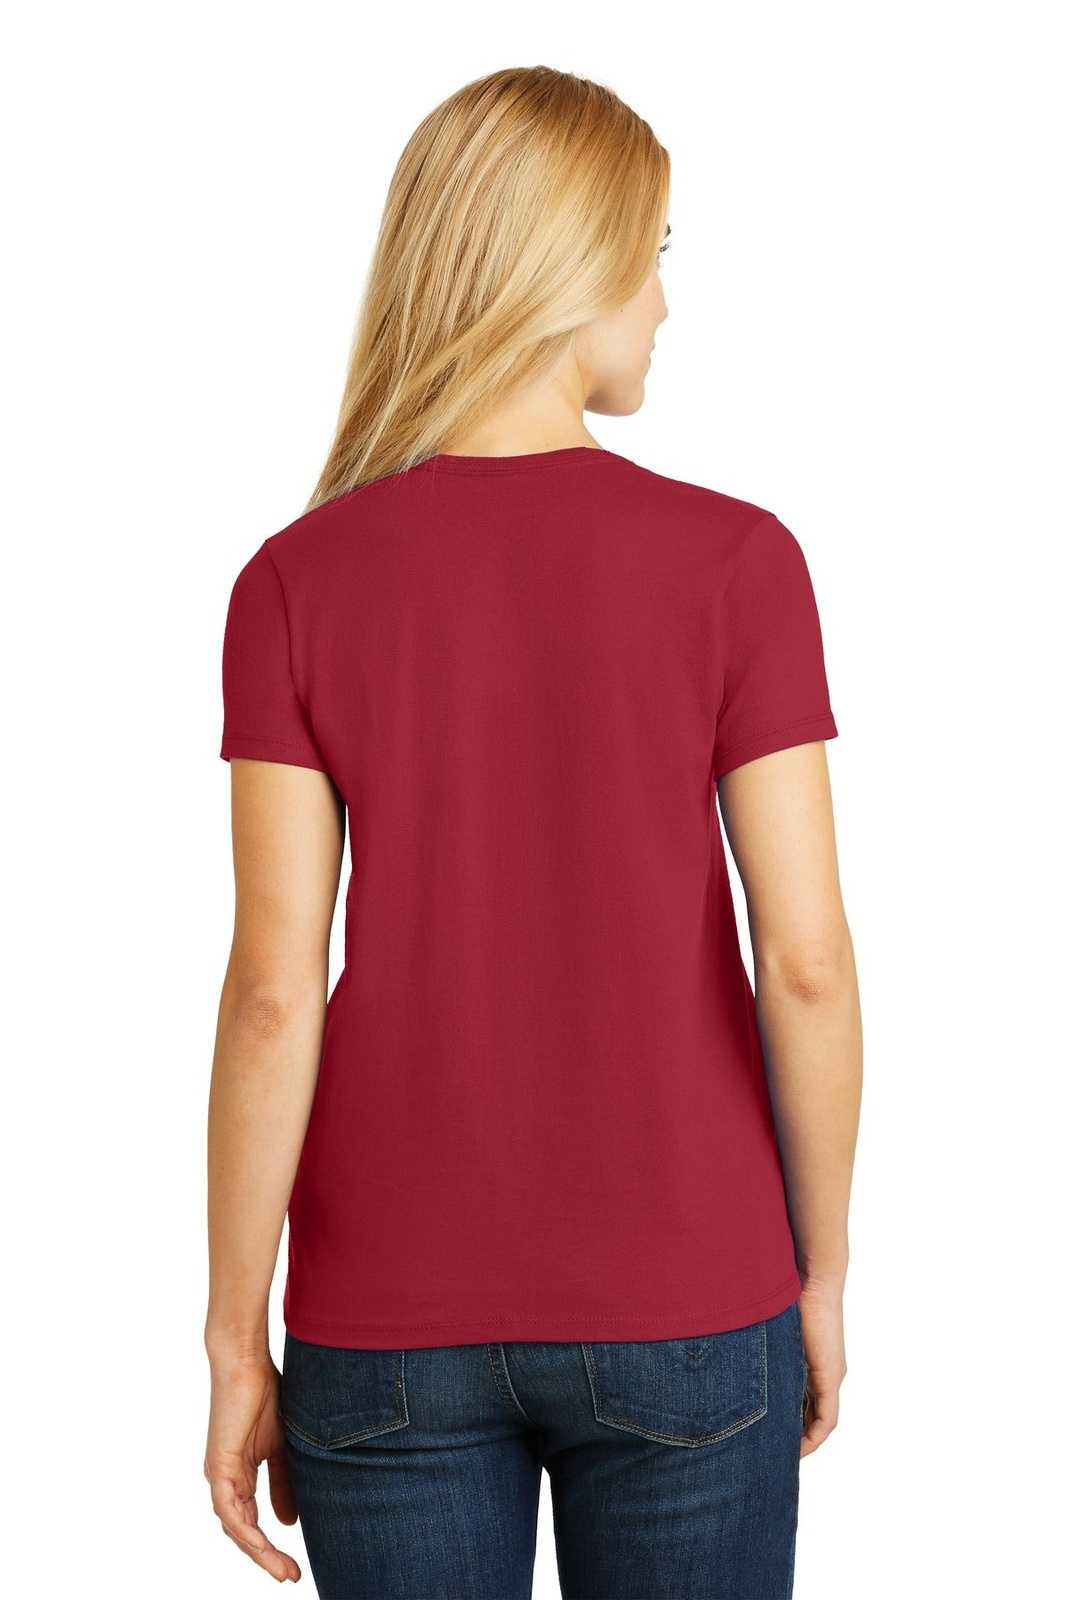 Hanes 5780 Ladies Comfortsoft V-Neck Tee - Deep Red - HIT a Double